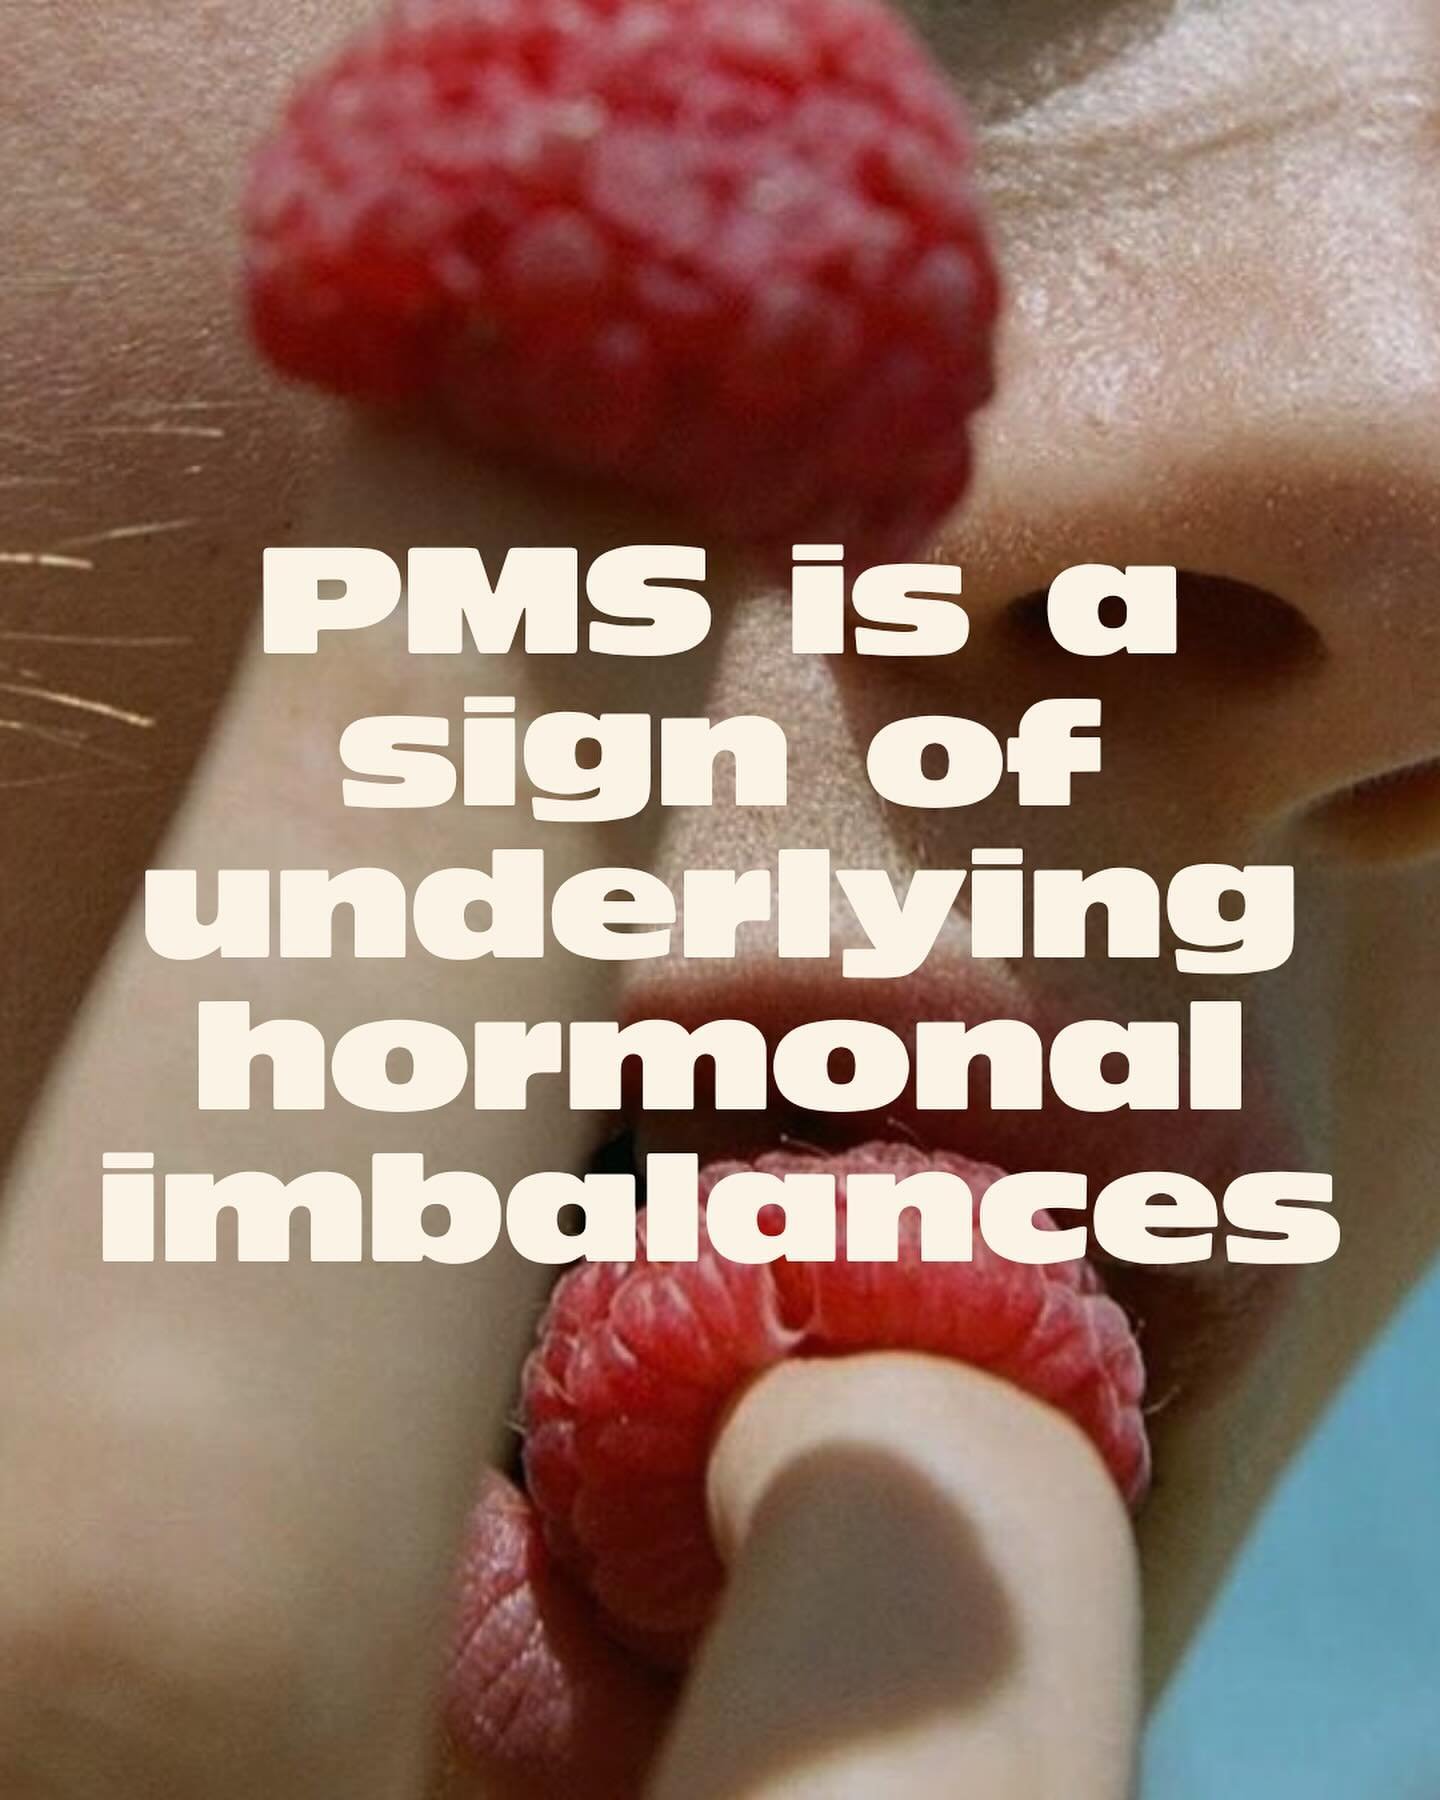 Menstrual and hormonal imbalances  can stem from various factors, such insufficient nutrition, poor elimination pathways like pooping and detox problems, chronic stress (even low grade chronic stress), inflammation, and genetics. 

But guess what ?! 